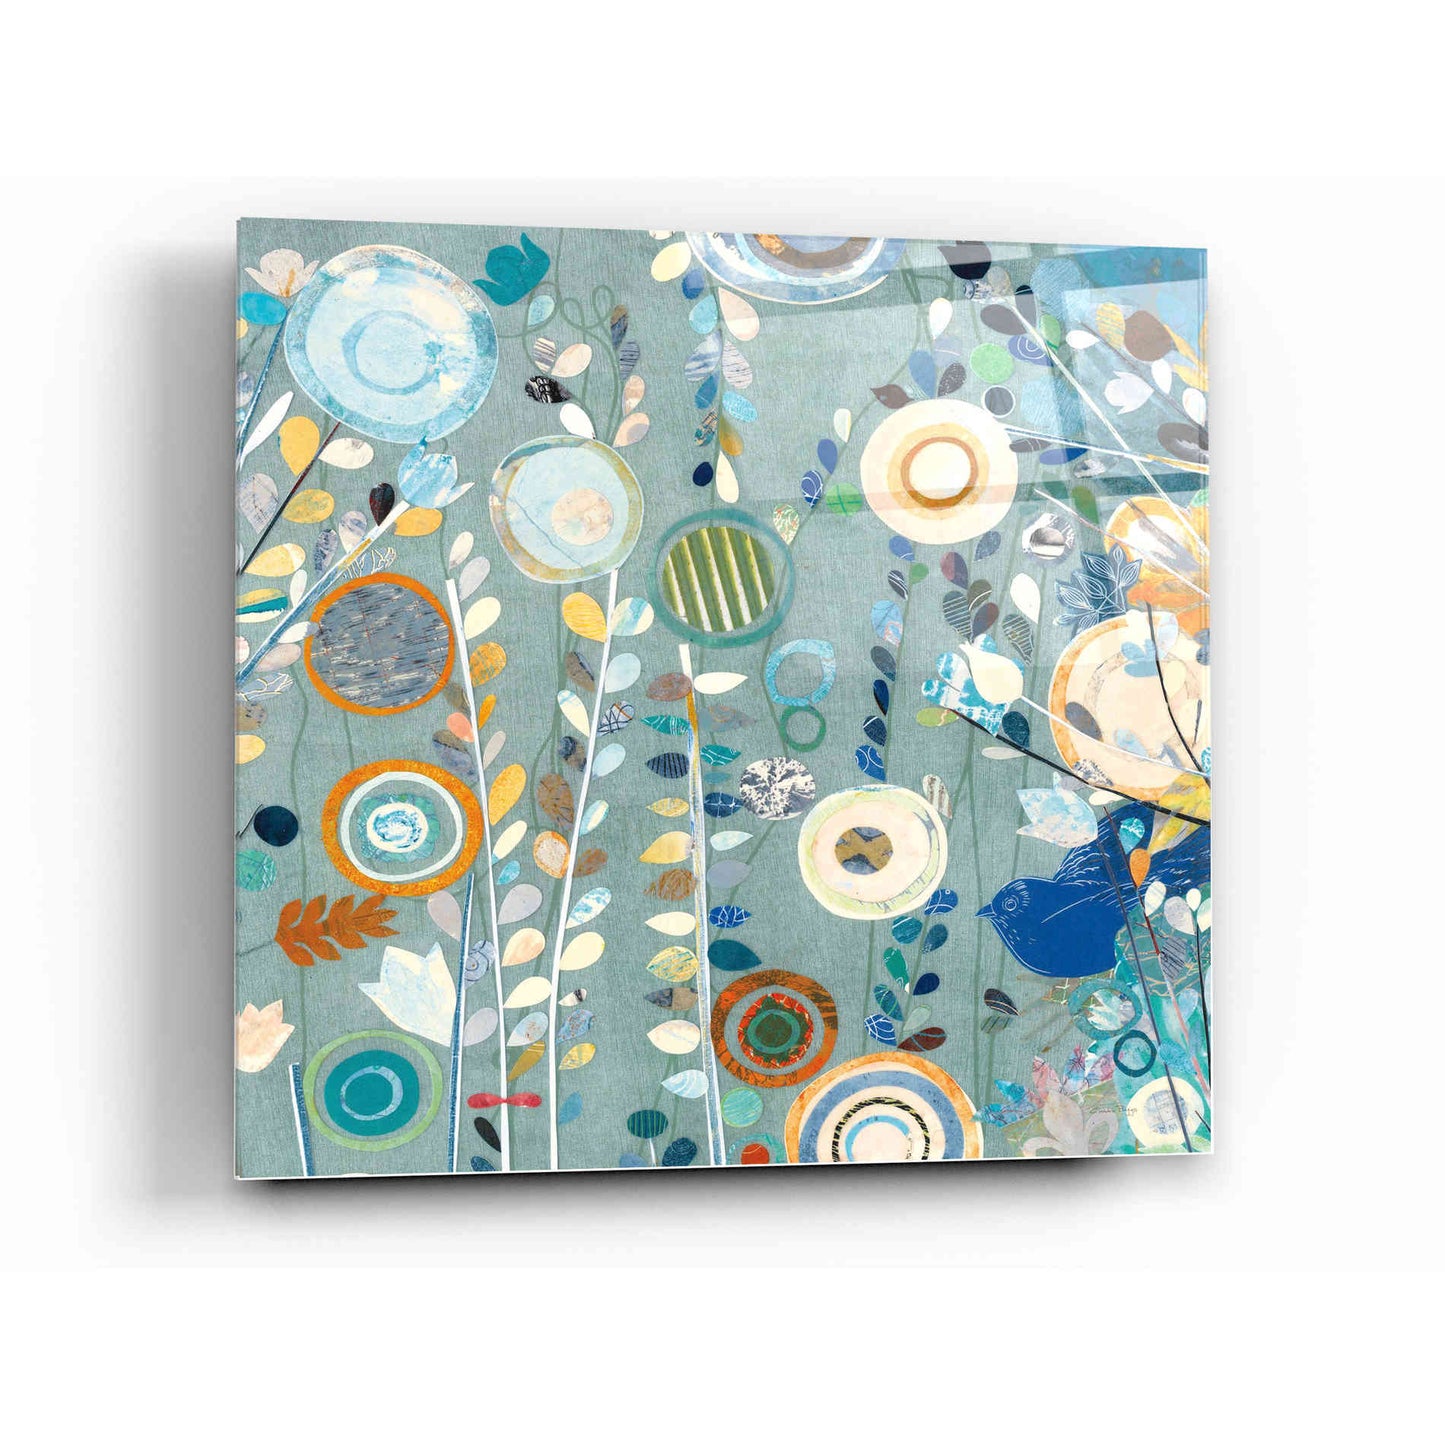 Epic Art 'Ocean Garden II Square' by Candra Boggs, Acrylic Glass Wall Art,12 x 12